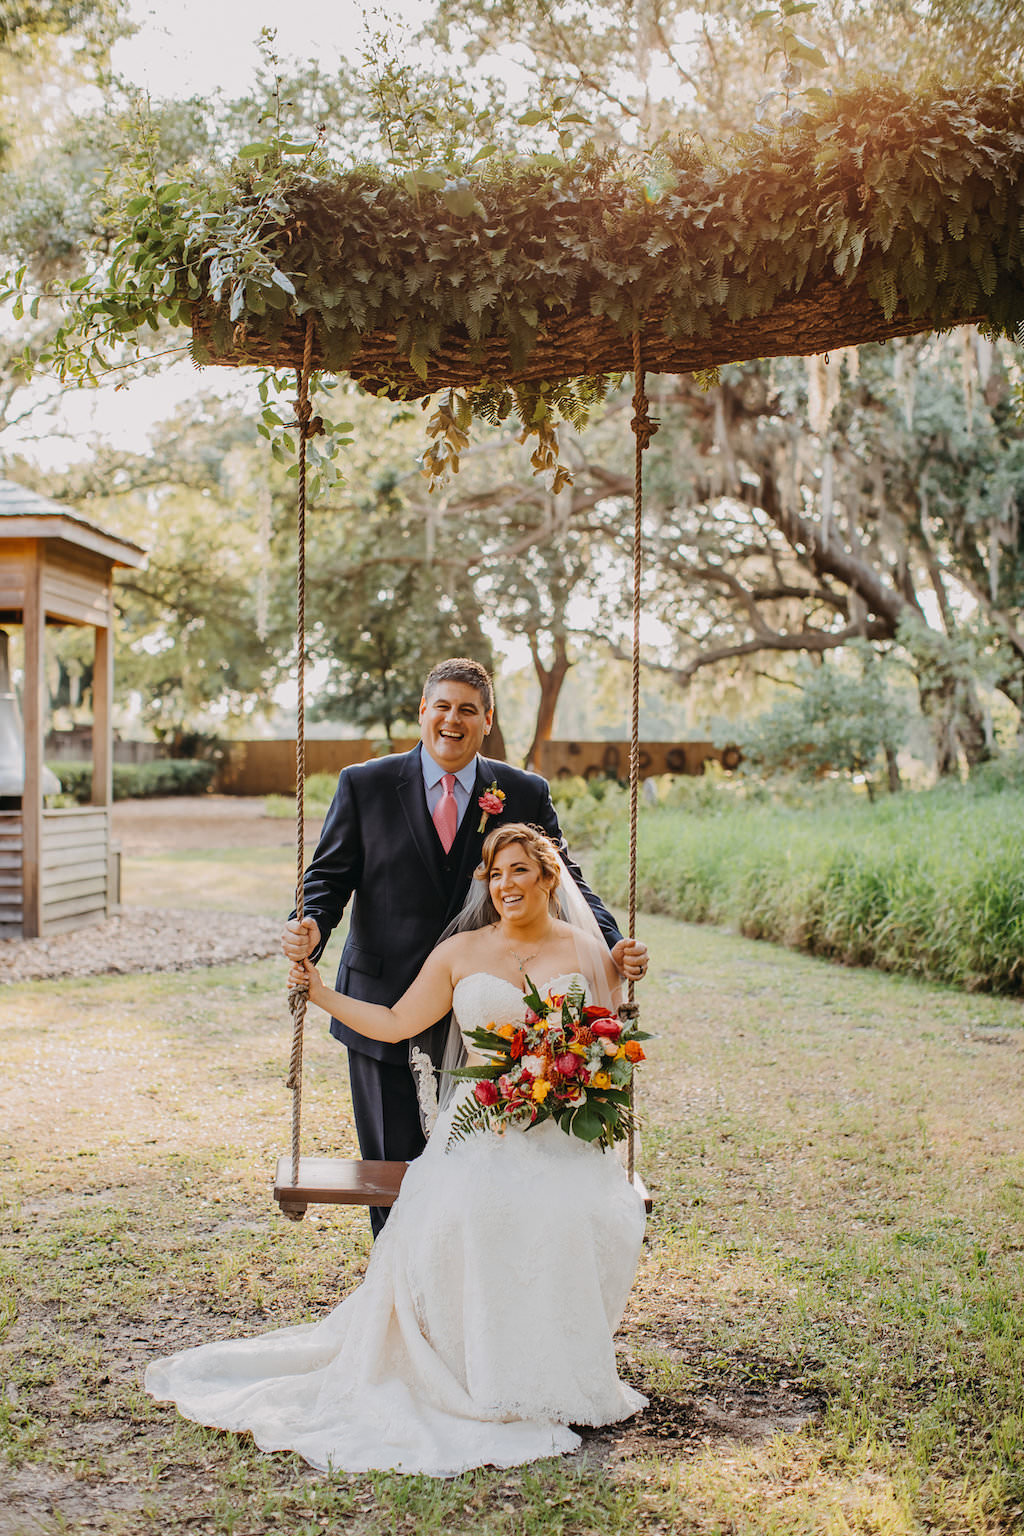 Outdoor Bride and Groom Wedding Portrait on Swing from Tree, Bride in A-Line Sweetheart Strapless Lace Wedding Dress with Tropical Floral Bouquet, Groom in Navy Blue Suit and Pink Tie | Tampa Bay Photographer Rad Red Creative | Rustic Venue Cross Creek Ranch